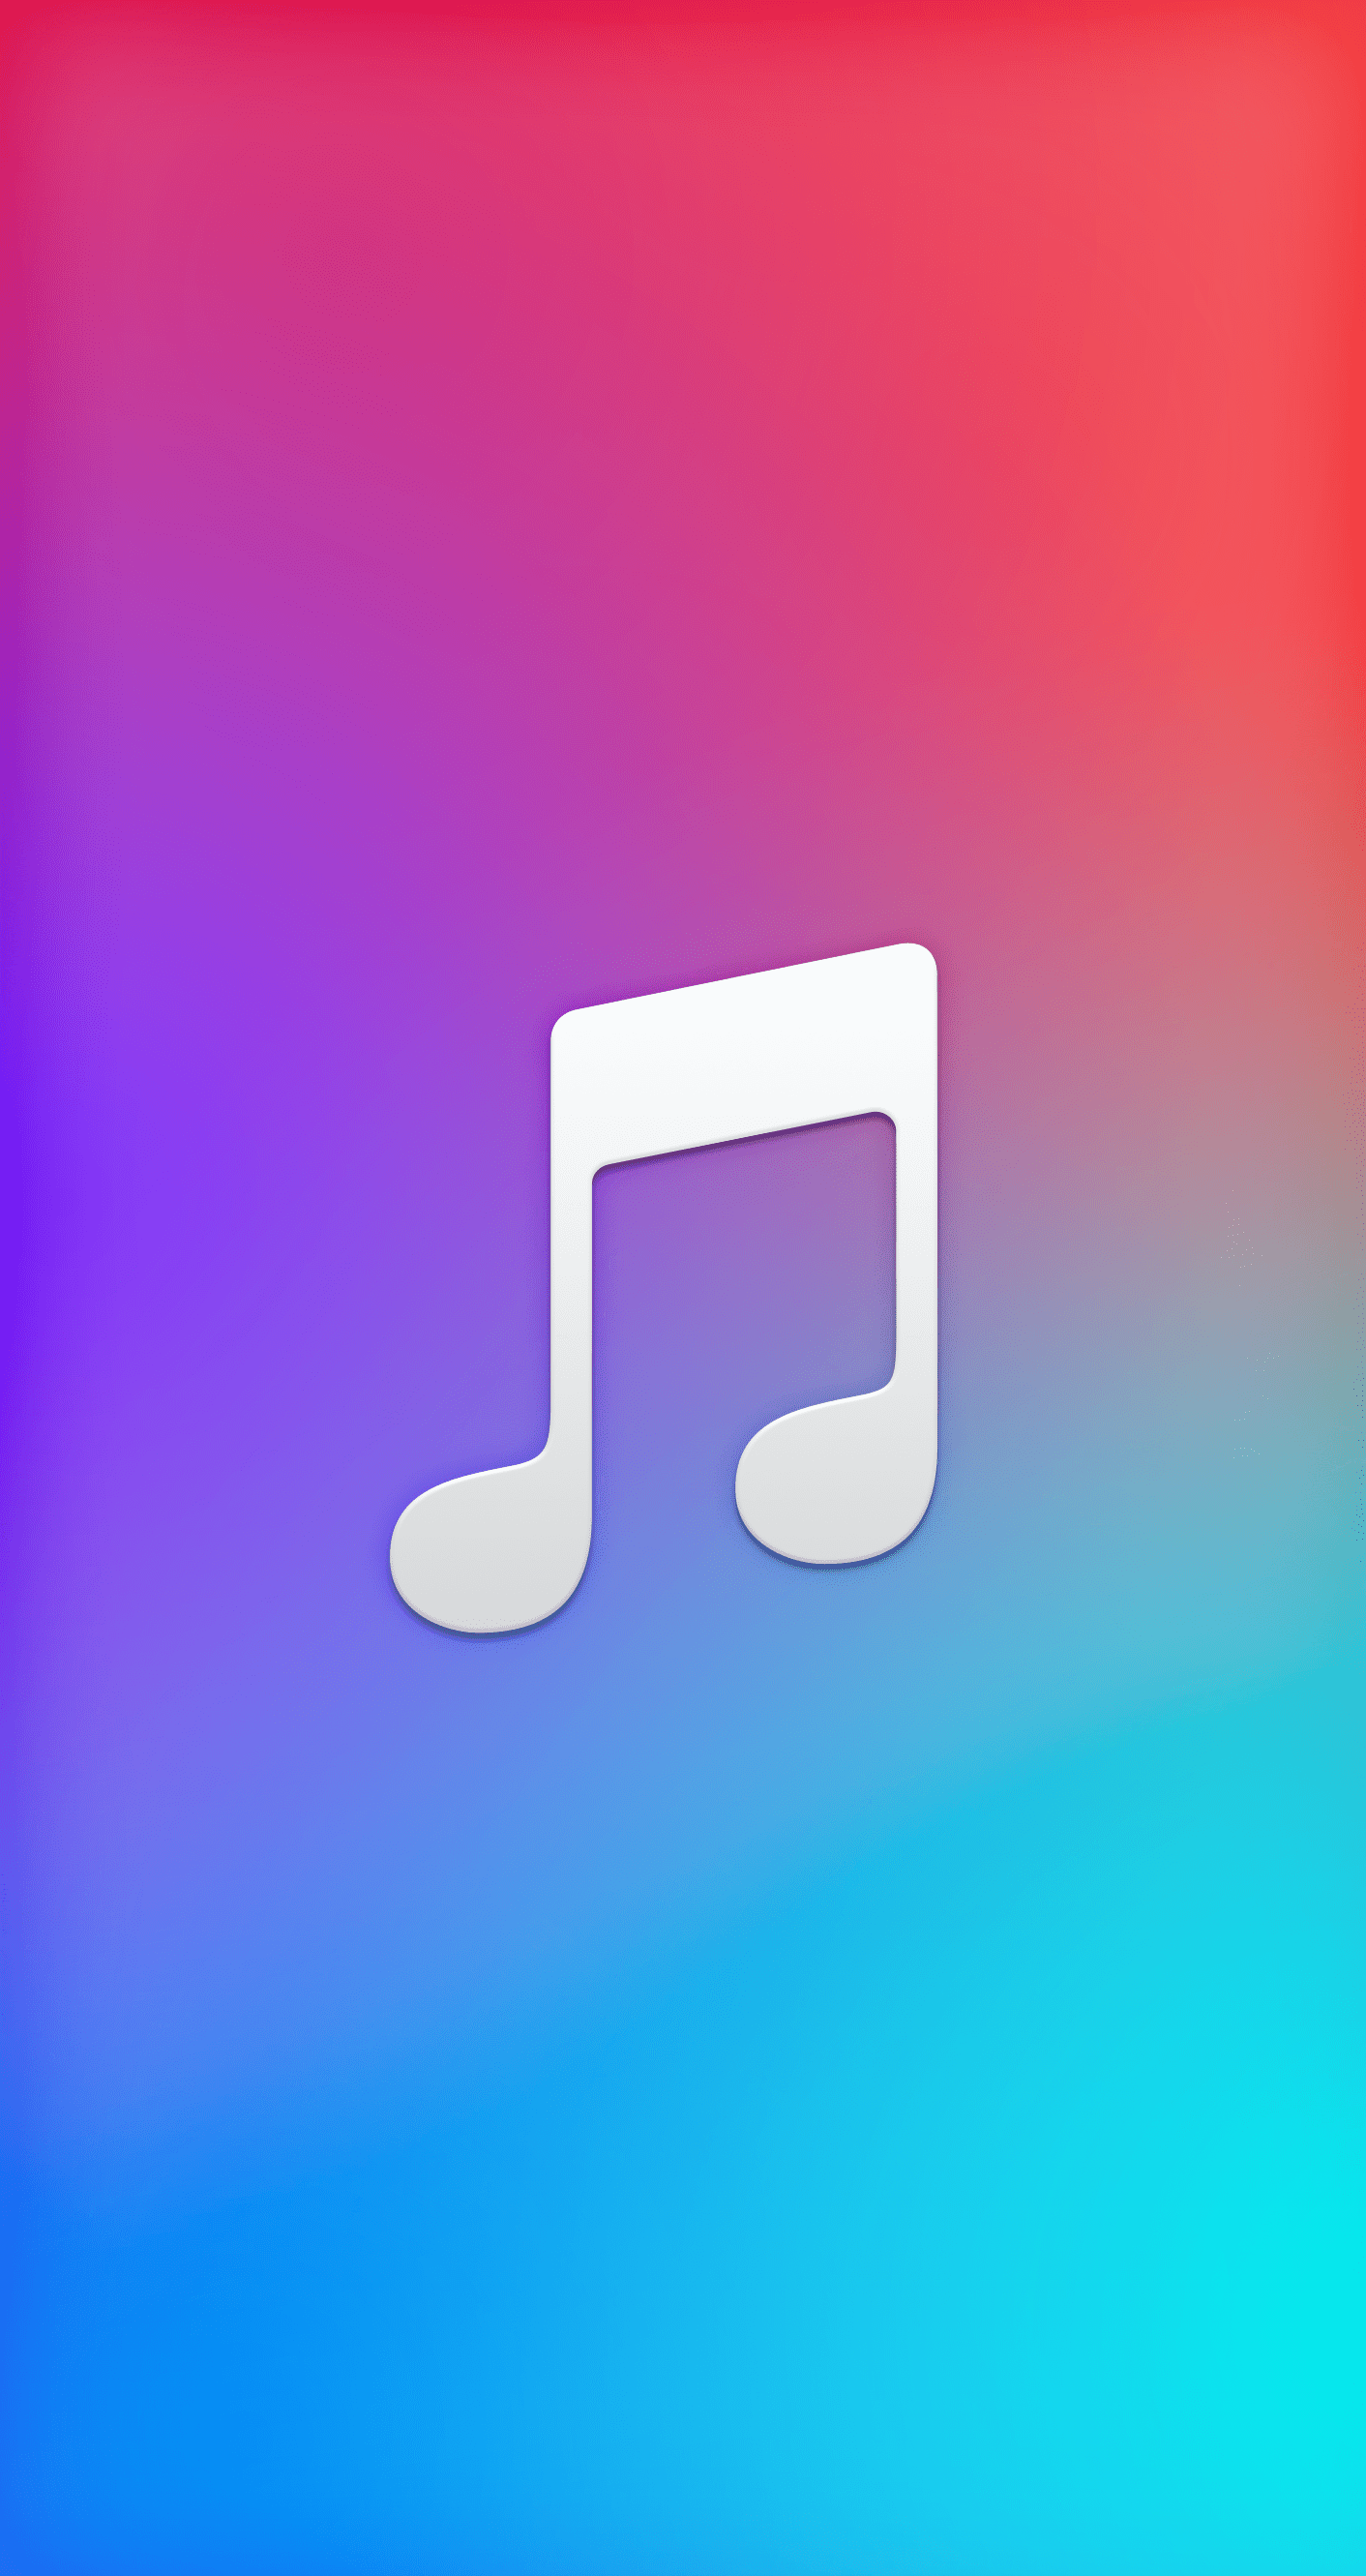 Music Hd Iphone Wallpapers